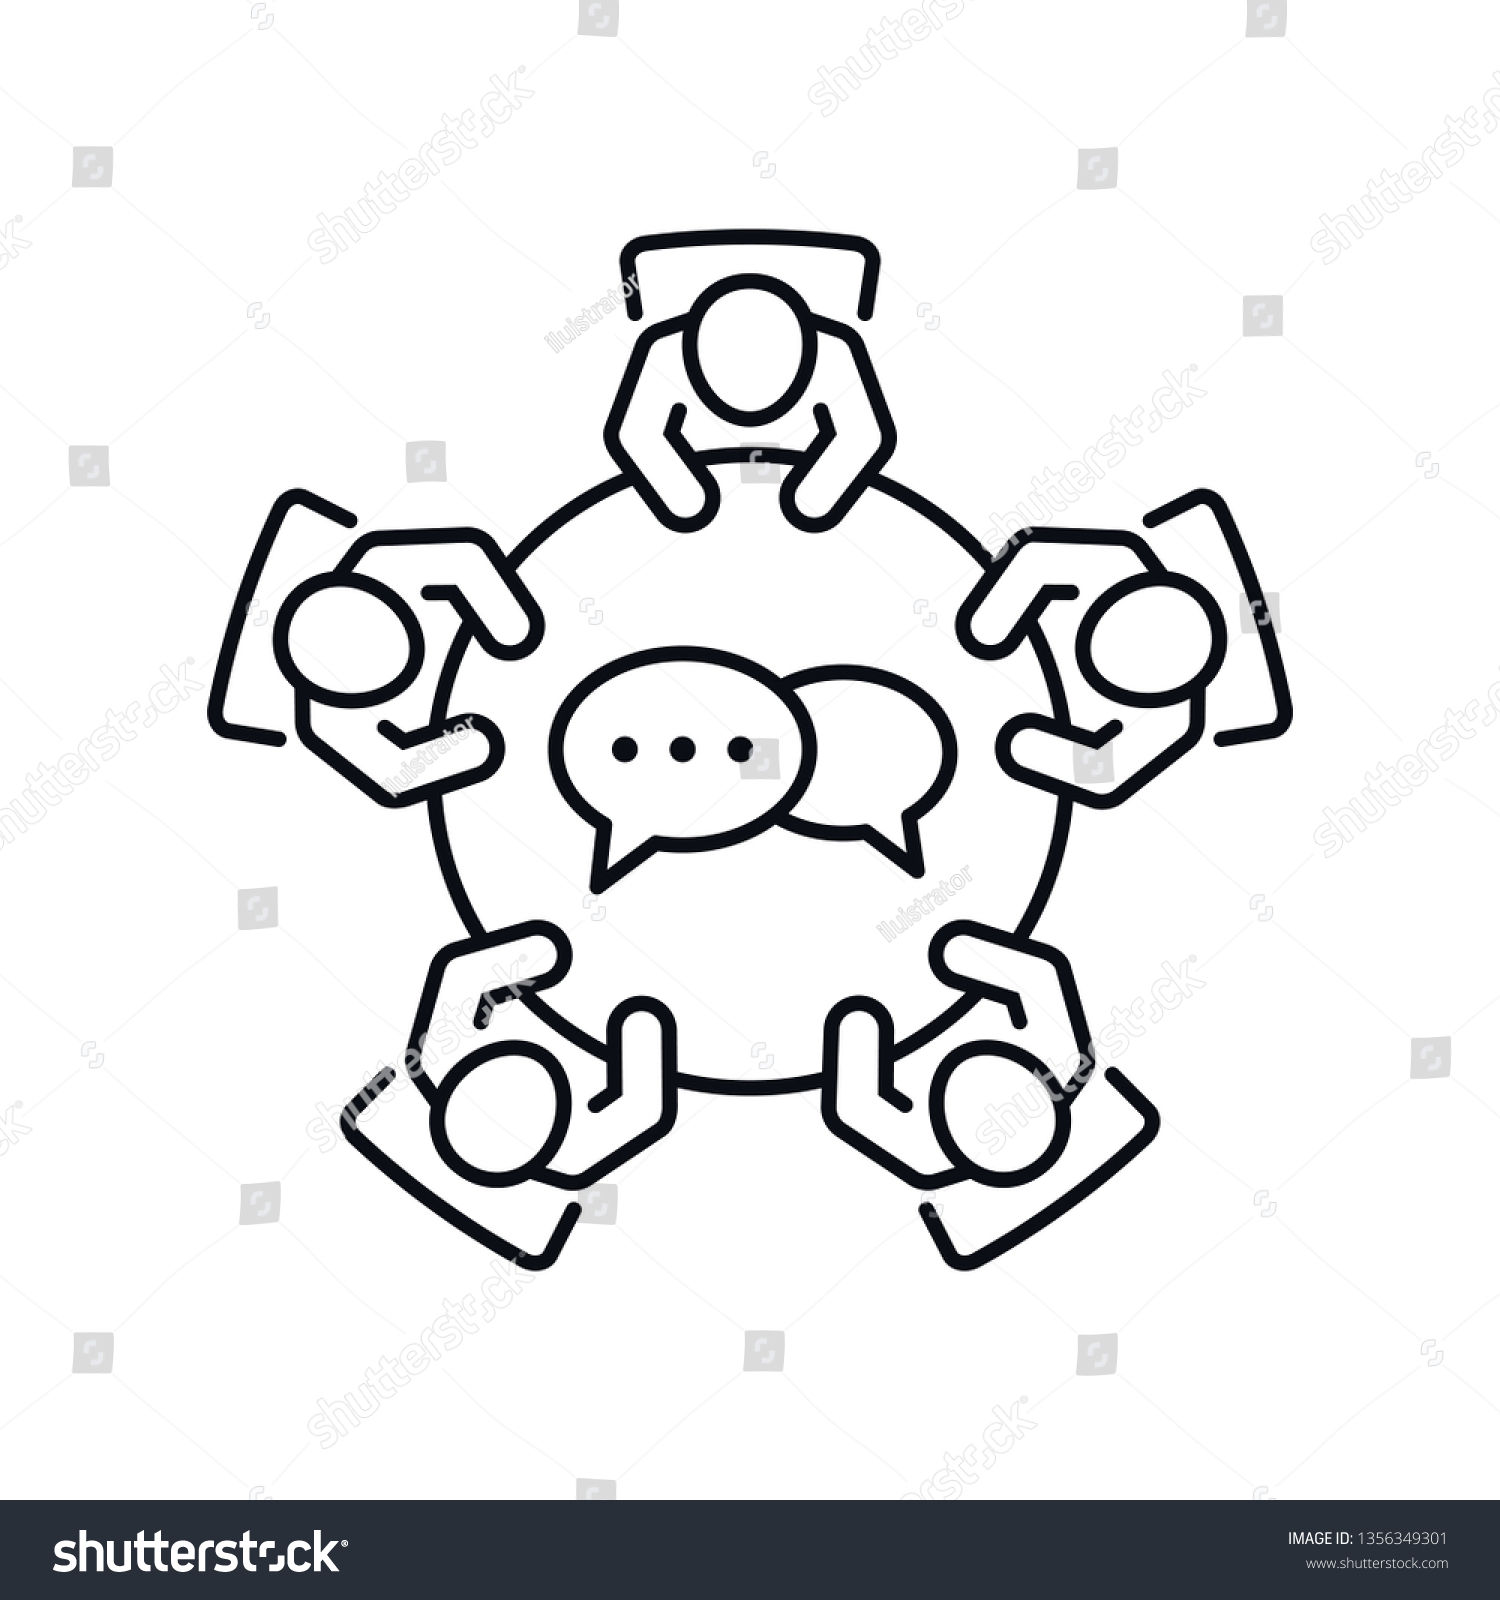 SVG of Brainstorming and teamwork icon. Business meeting. Discussion group. Debate team. Group of people in conference room sitting around a table working together on new creative projects. svg